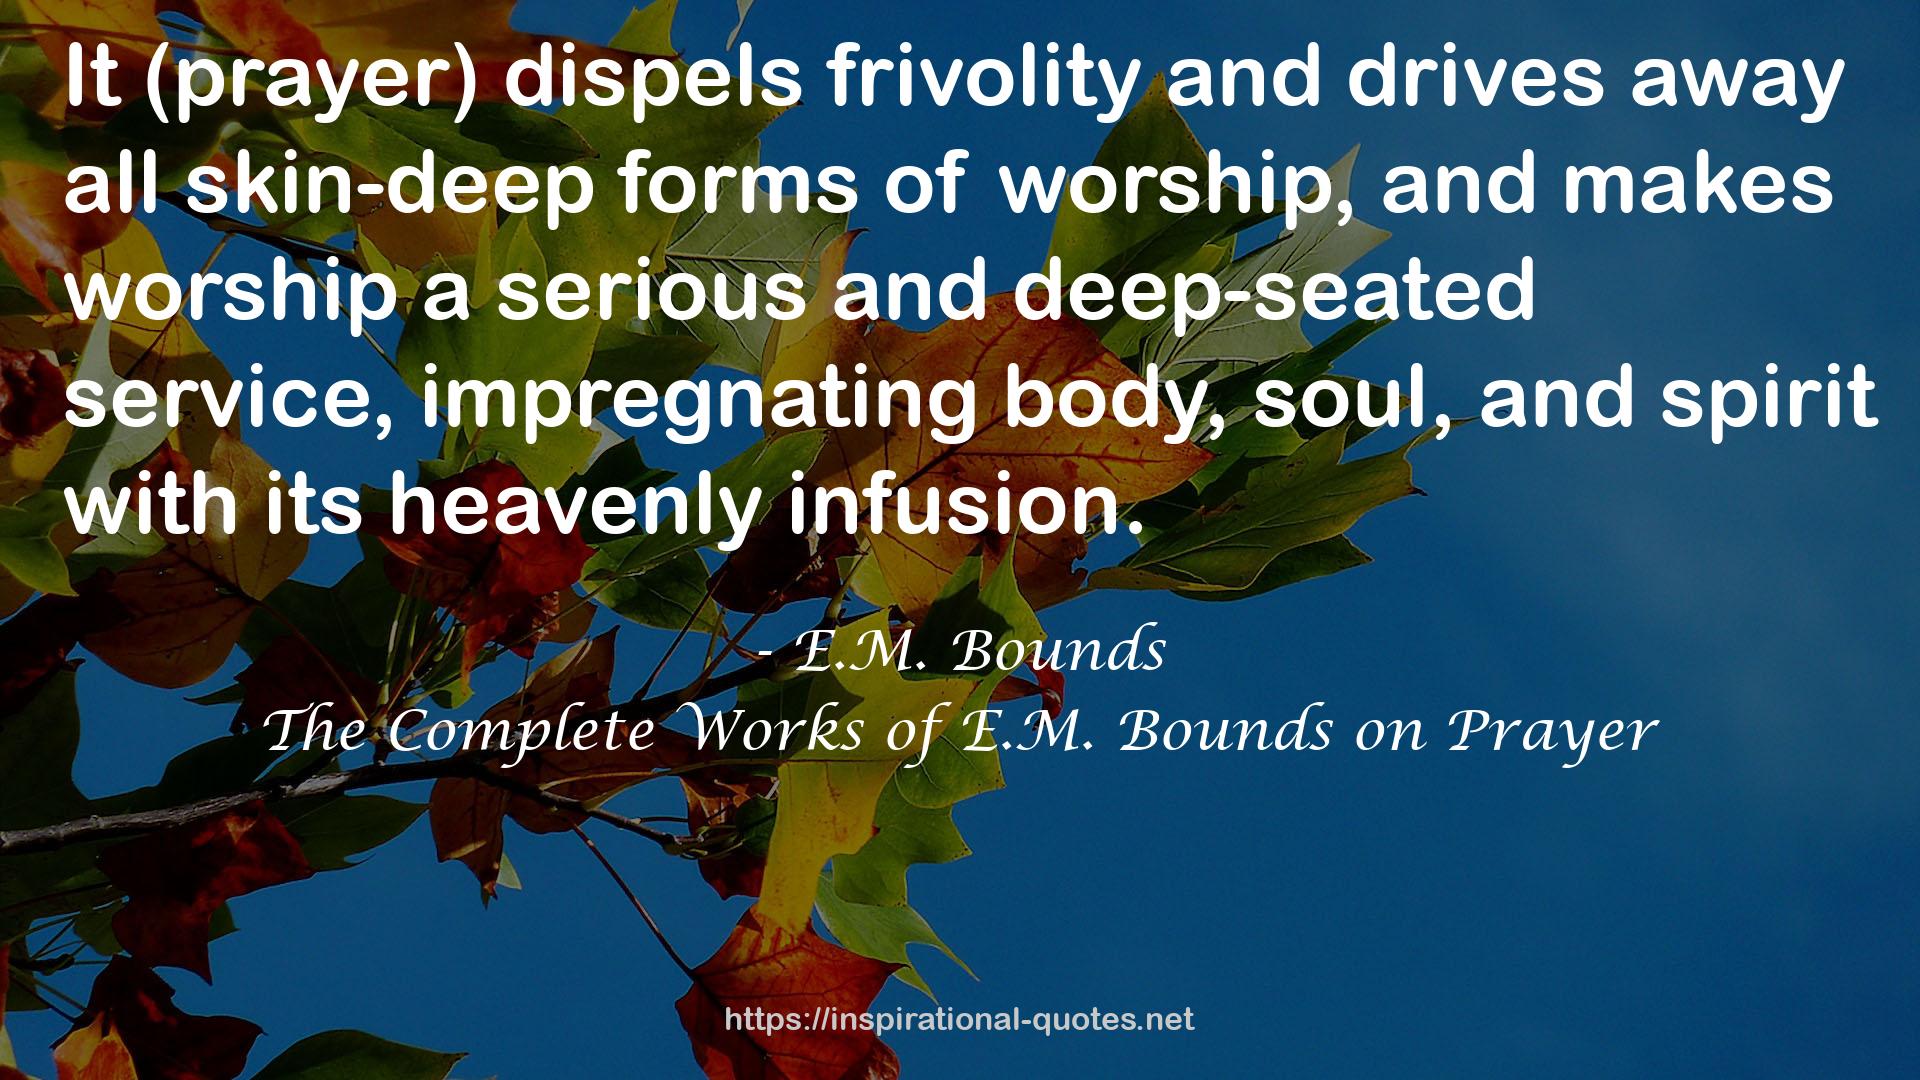 The Complete Works of E.M. Bounds on Prayer QUOTES